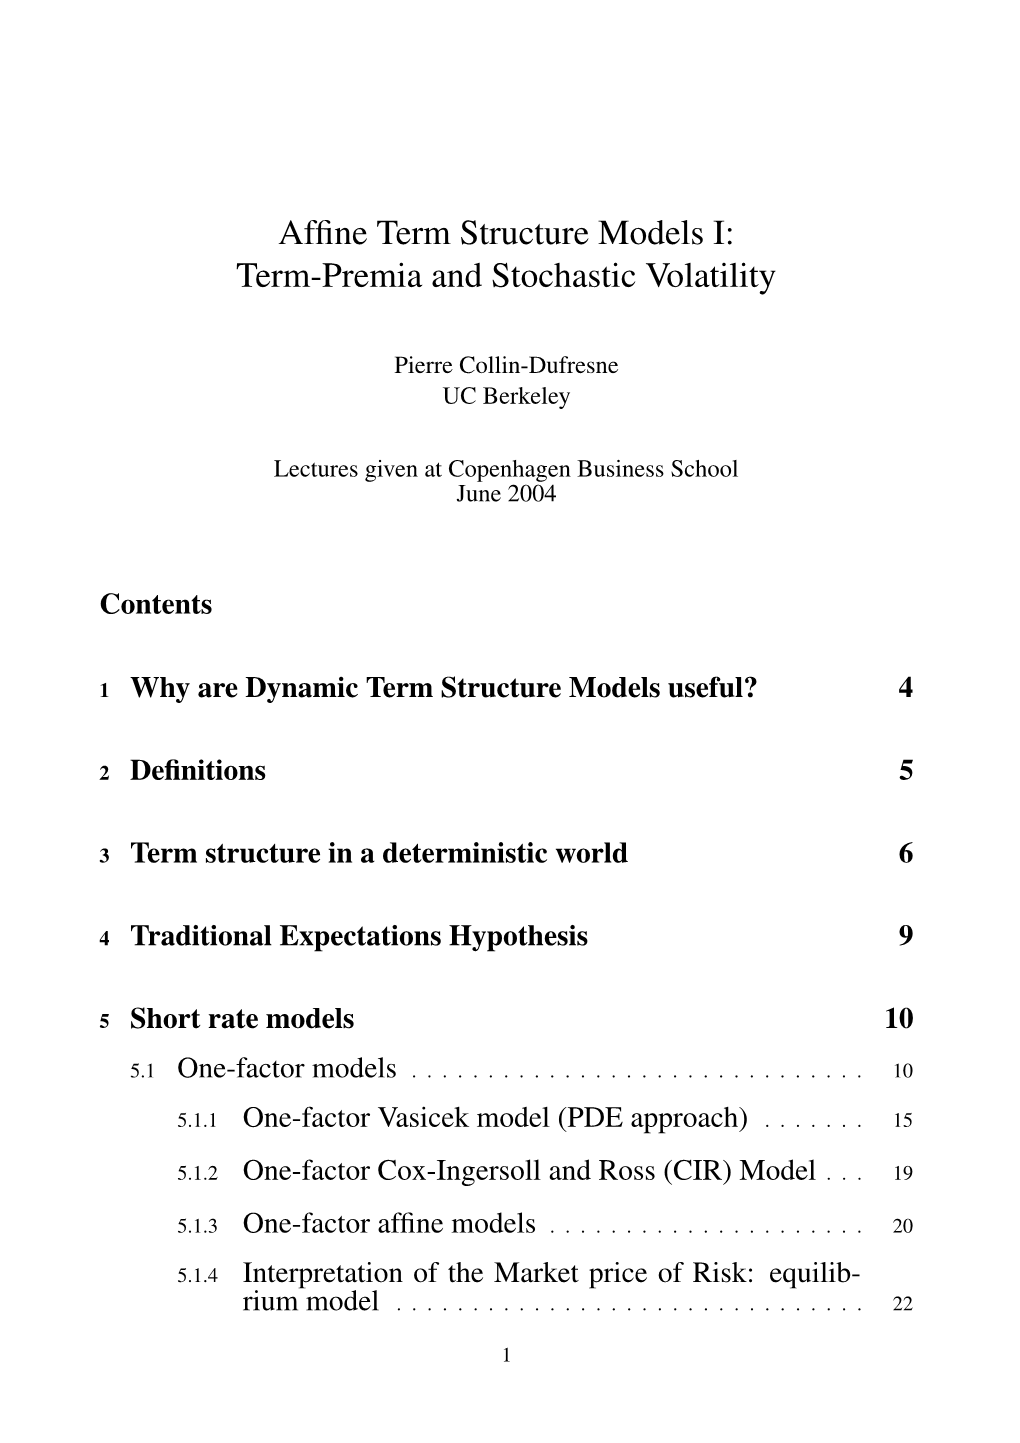 Affine Term Structure Models I: Term-Premia and Stochastic Volatility